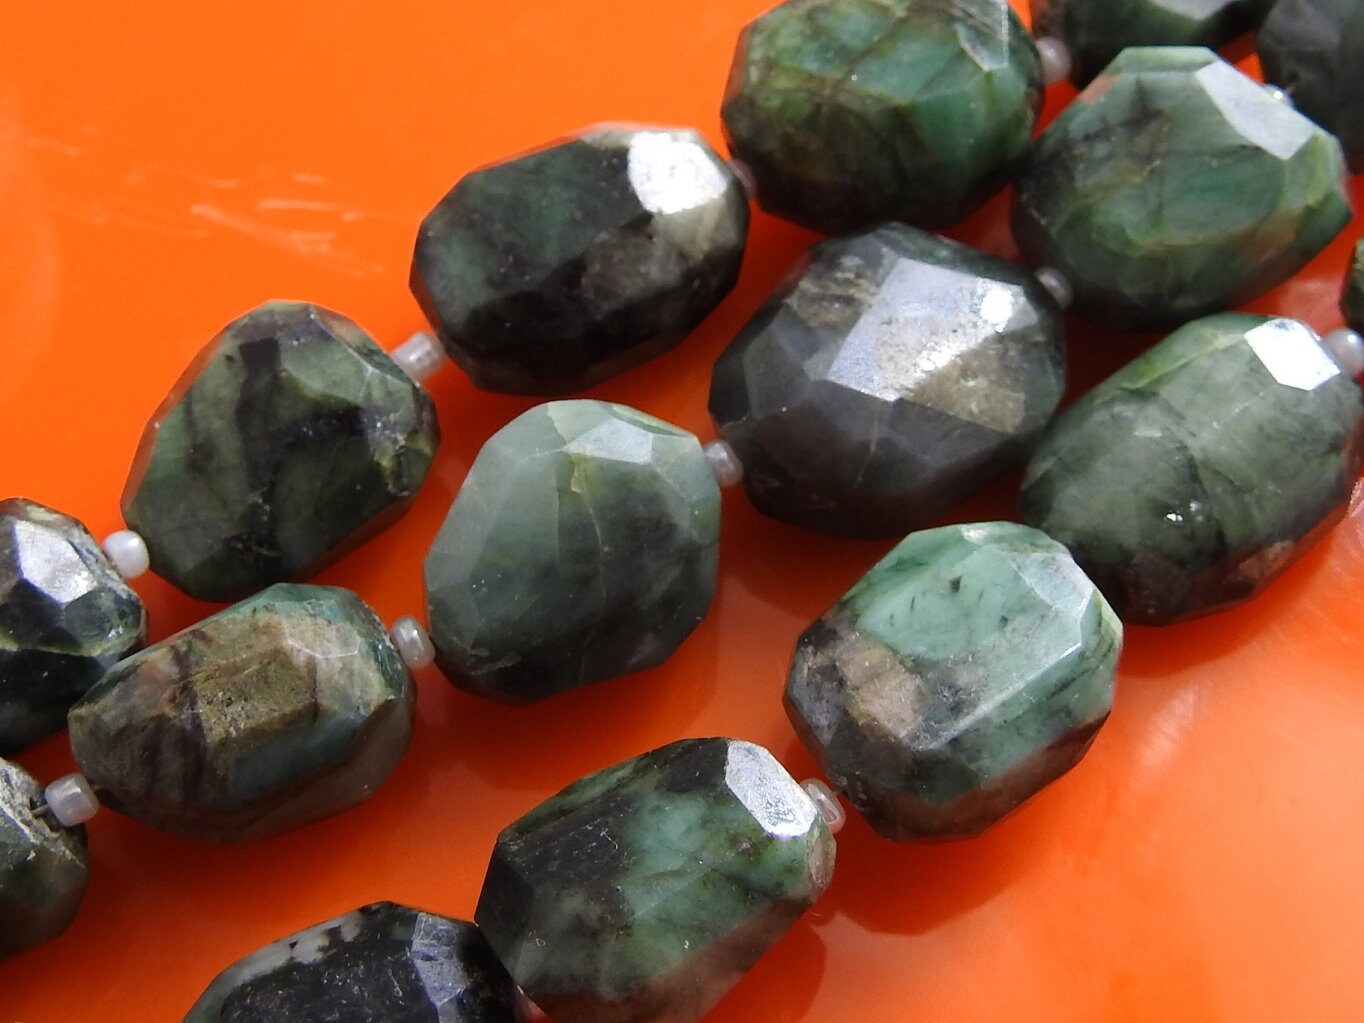 100%Natural,Emerald Faceted Tumble,Nugget,Irregular Shape Bead,Loose Stone,Handmade 12Inch 18X12To10XMM Approx Wholesaler,Supplies (pme)TU1 | Save 33% - Rajasthan Living 14